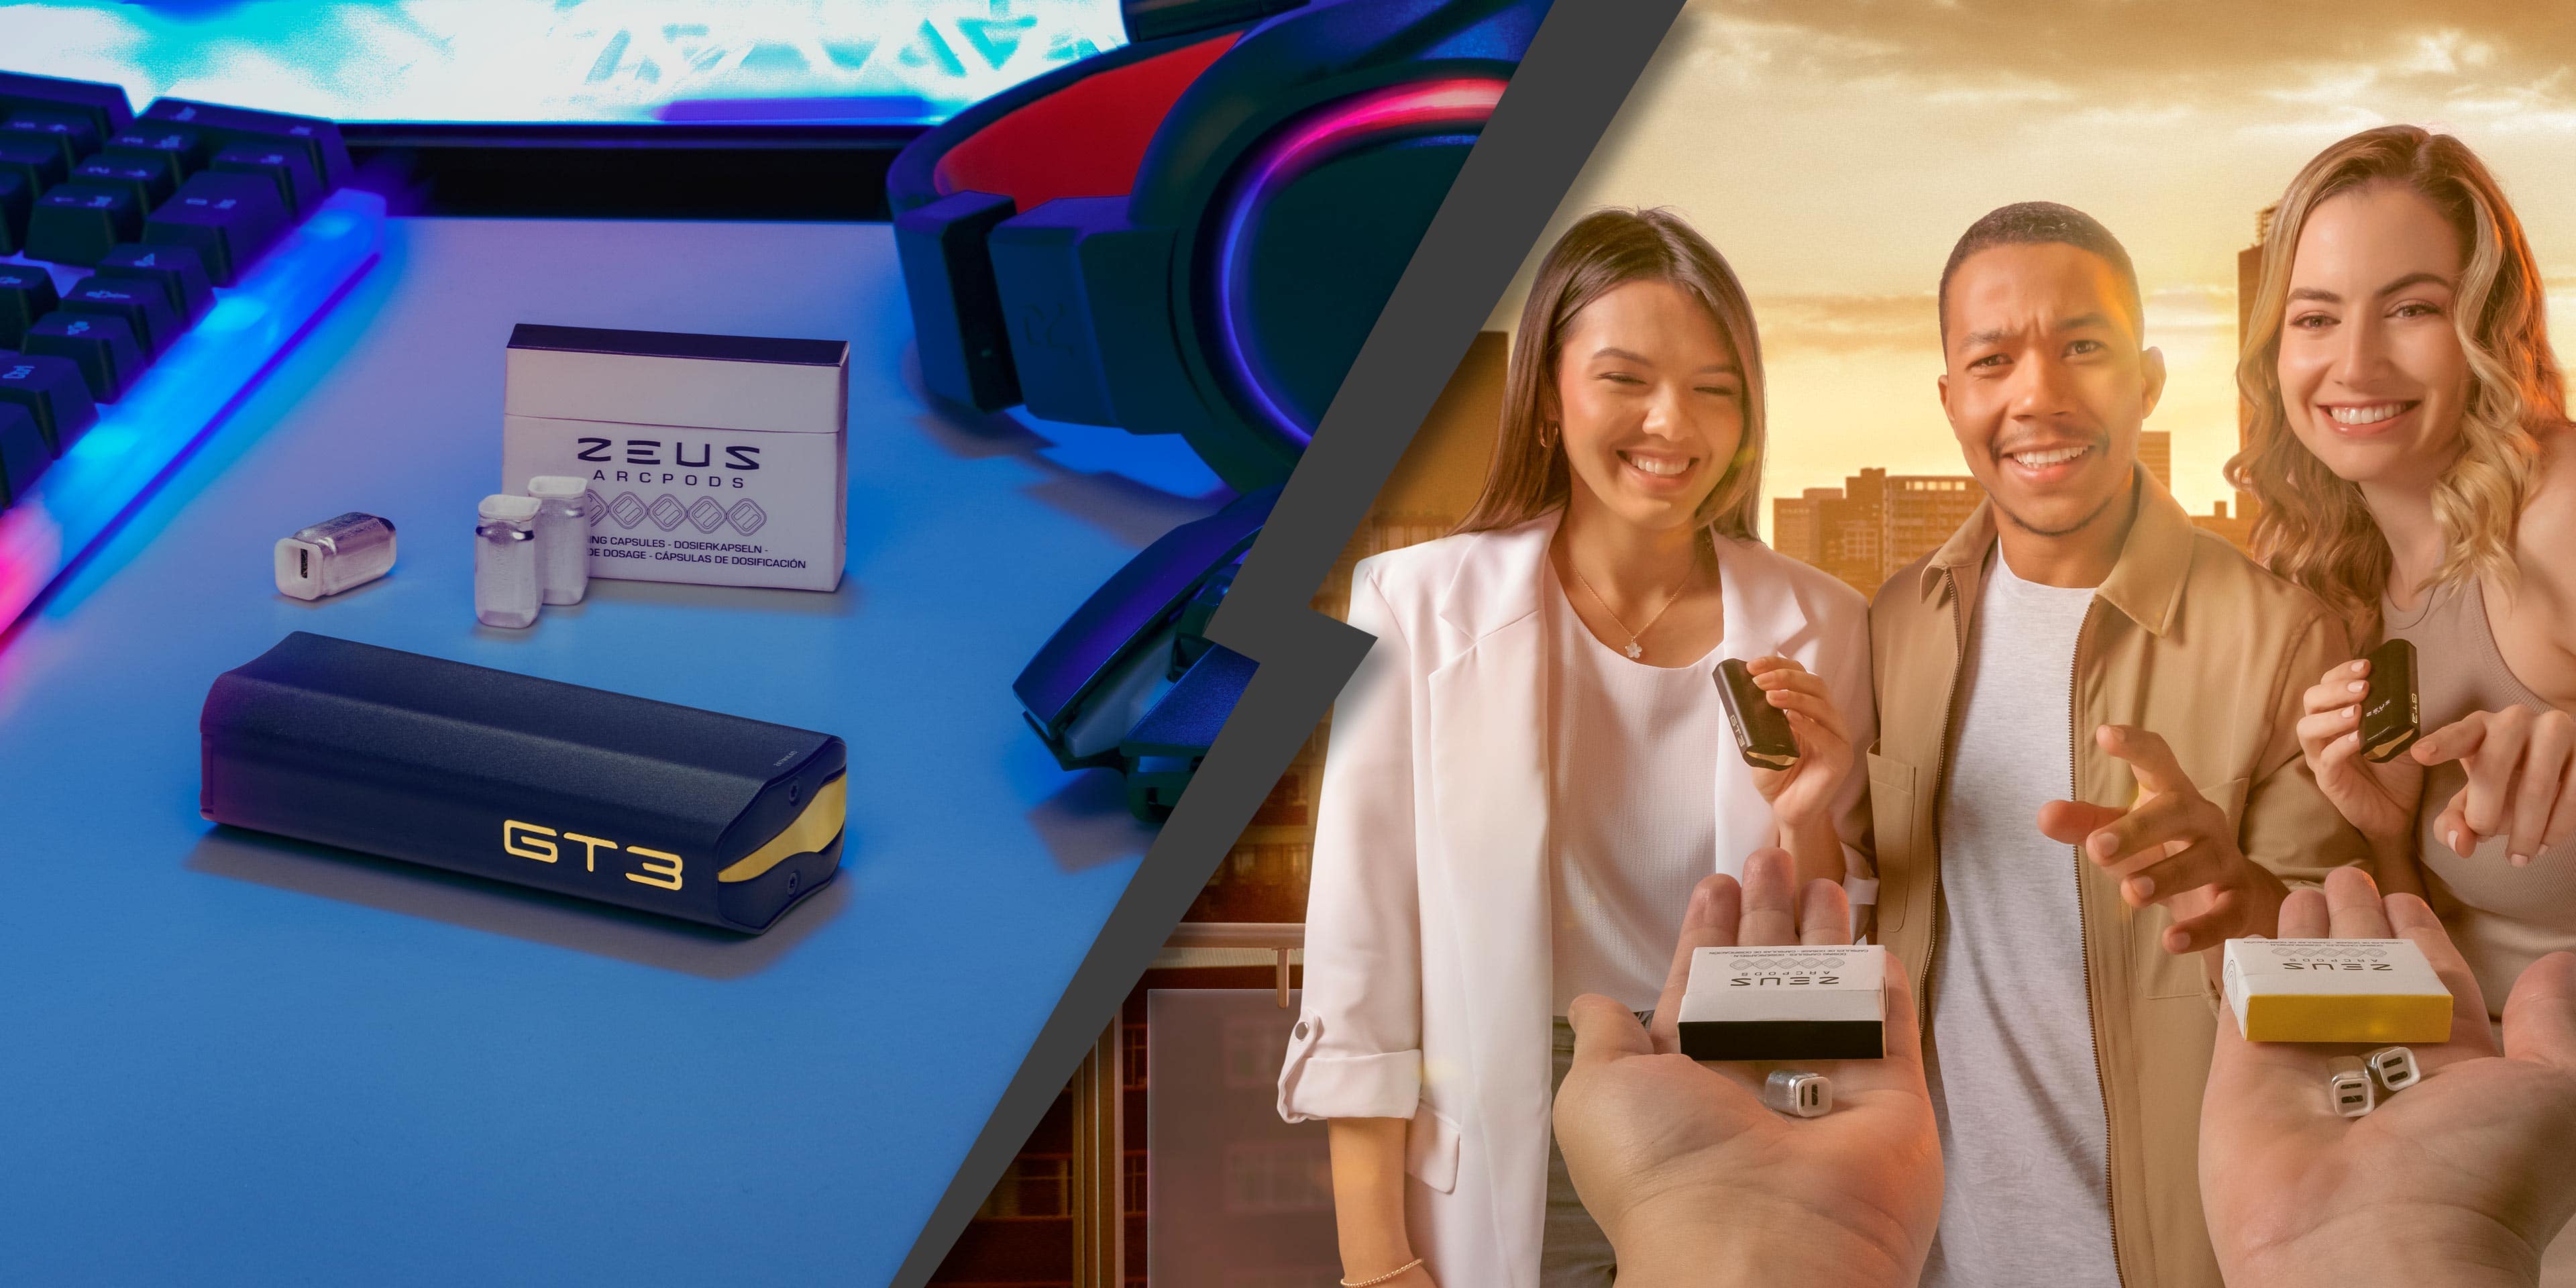 Left Side: The Zeus Arc GTS & ArcPod System incorporate themselves into a modern day gaming setup. Ready to be used, ready to play with. - Right Side: A group of friends get ready to enjoy their Zeus Arc GTS devices on a rooftop bar as the sun sets behind them.